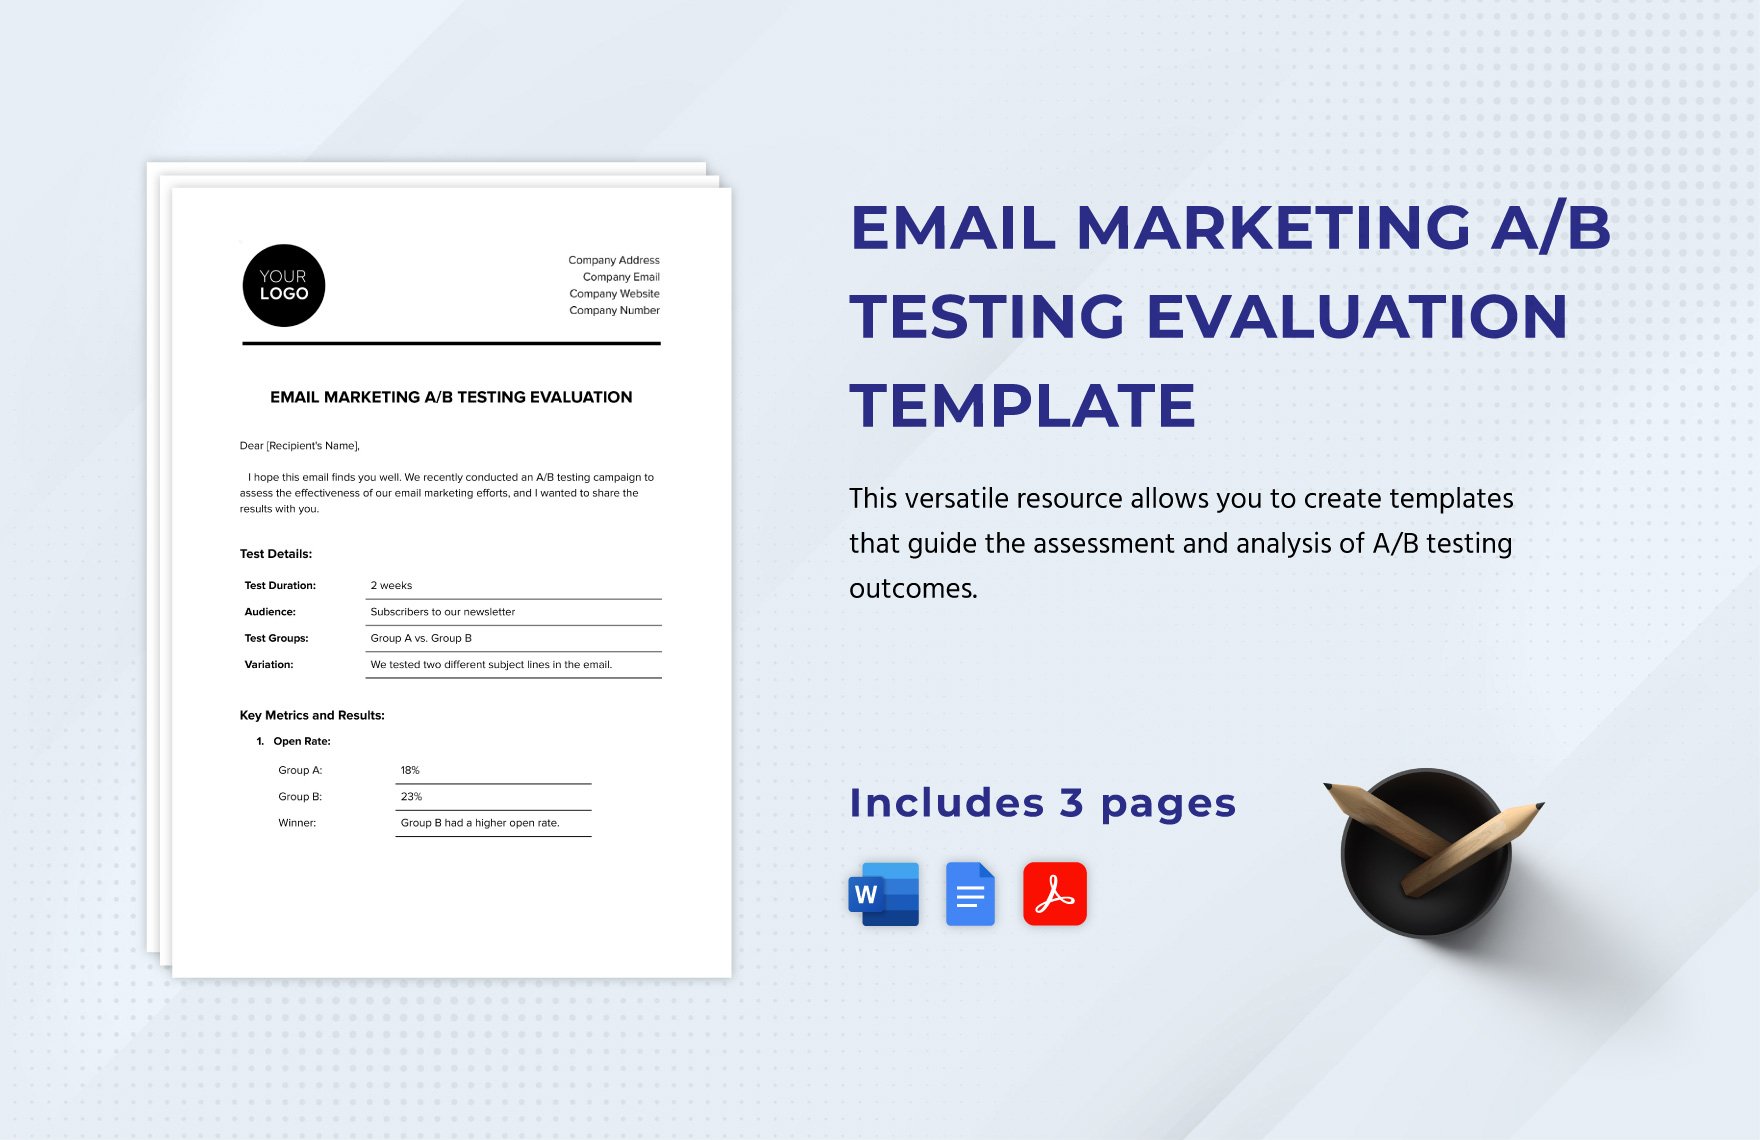 Email Marketing A/B Testing Evaluation Template